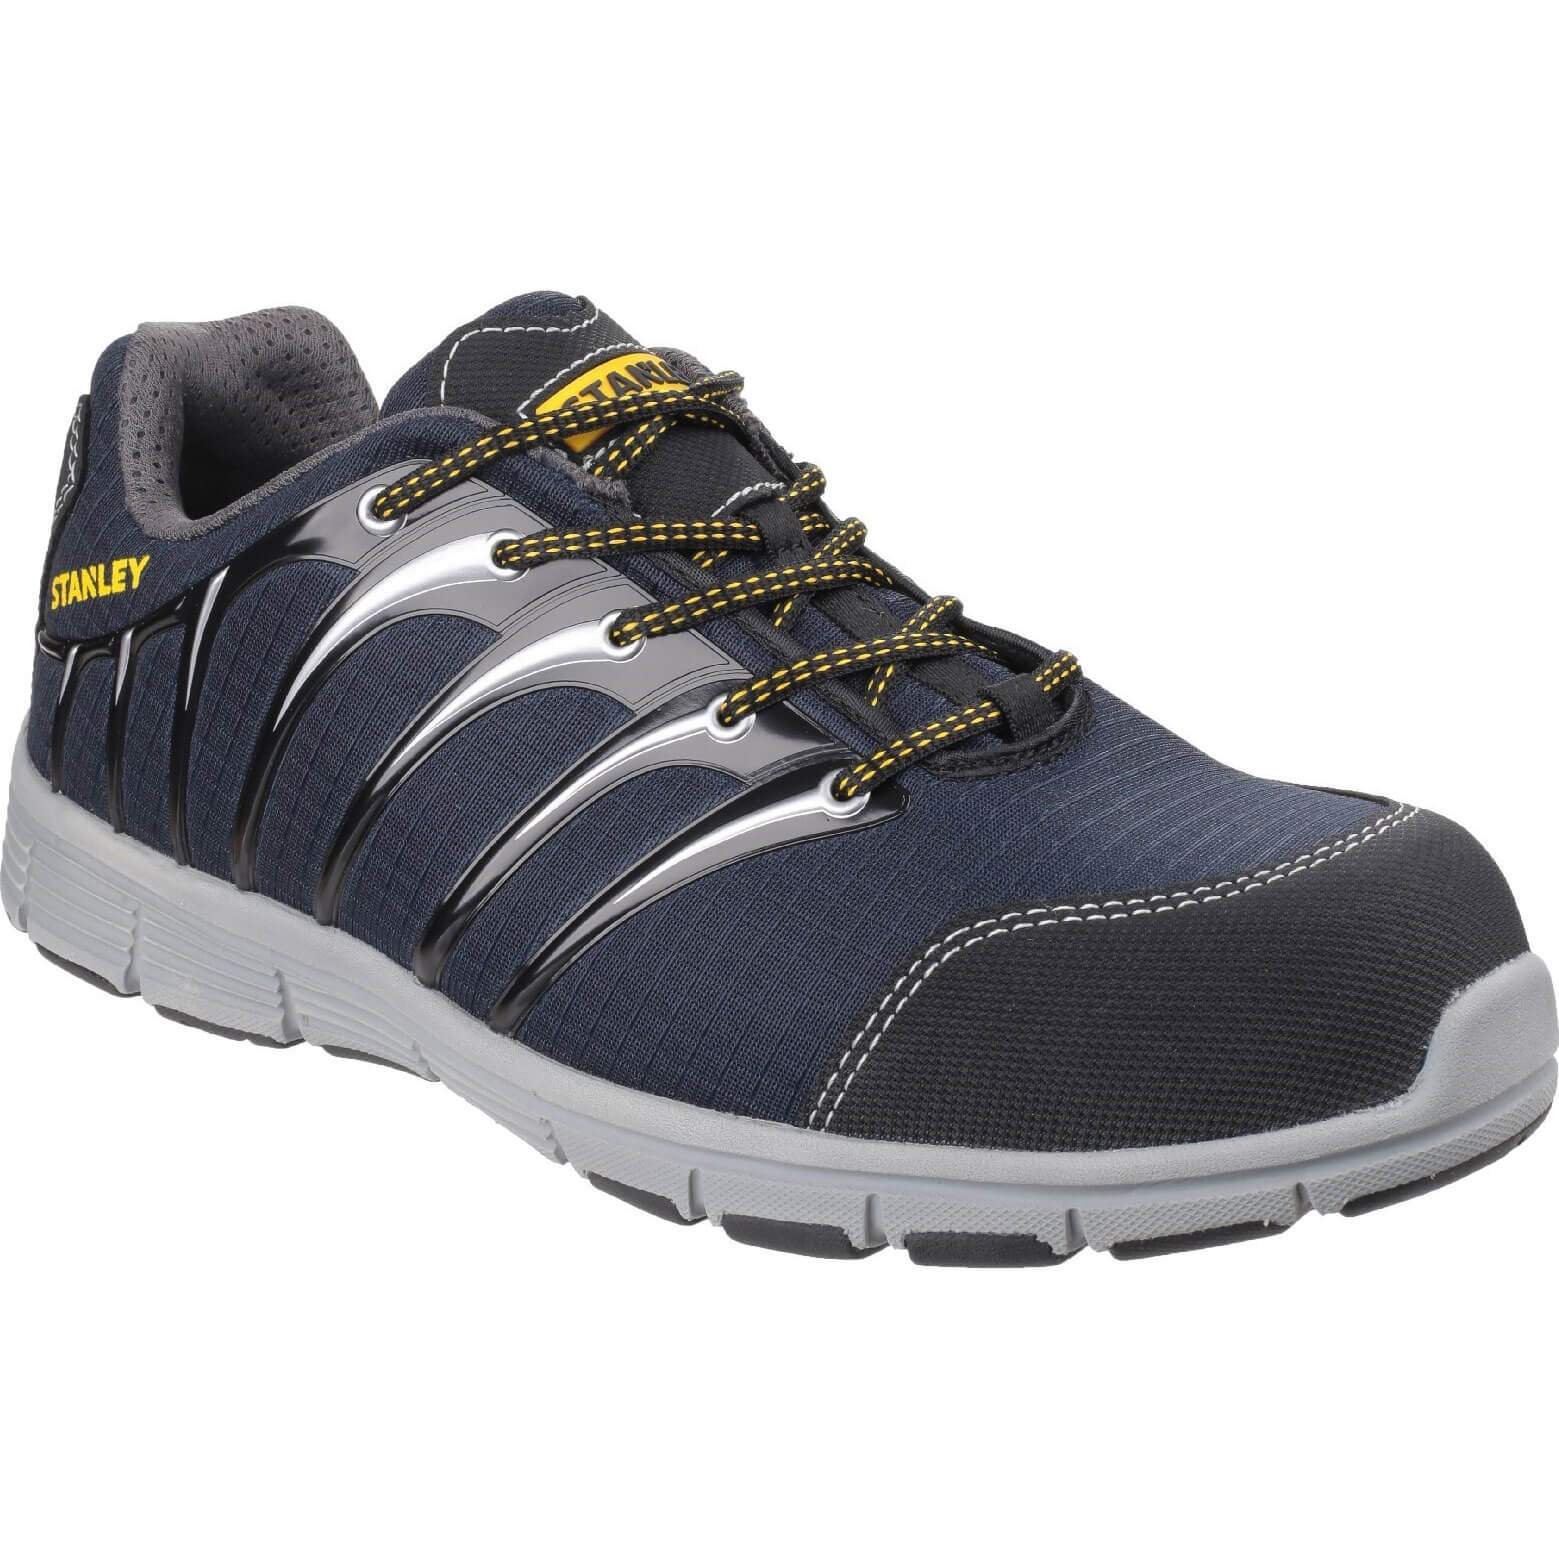 Image of Stanley Globe S1 P Sports Safety Trainer Navy / Grey Size 10